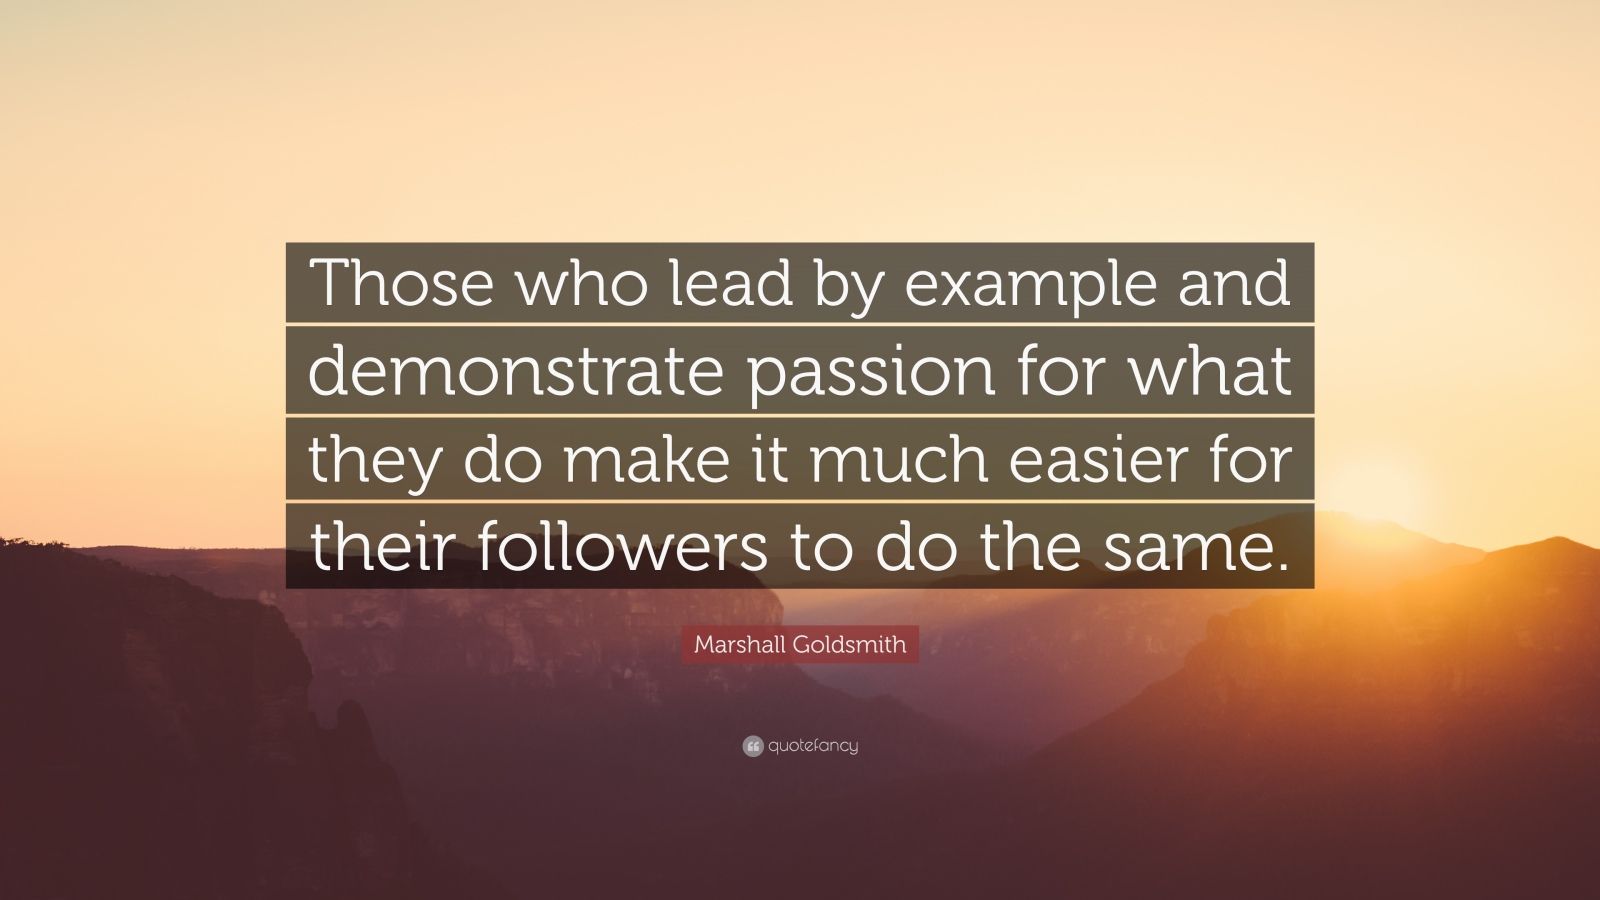 Marshall Goldsmith Quote: “Those who lead by example and demonstrate